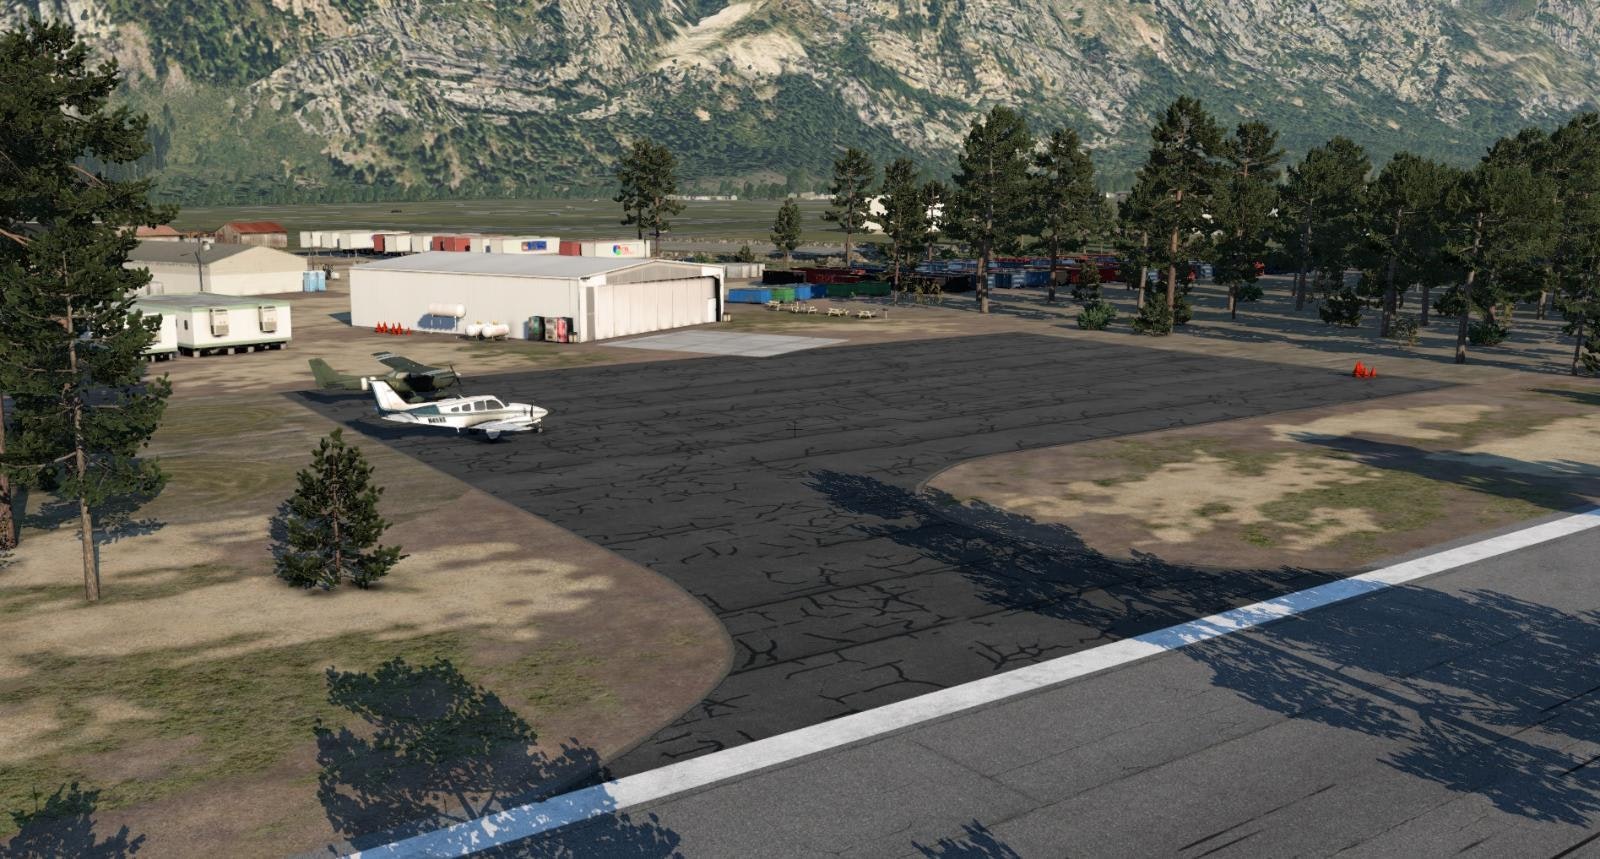 X-Plane 12 Scenery Gateway Information and More Previews